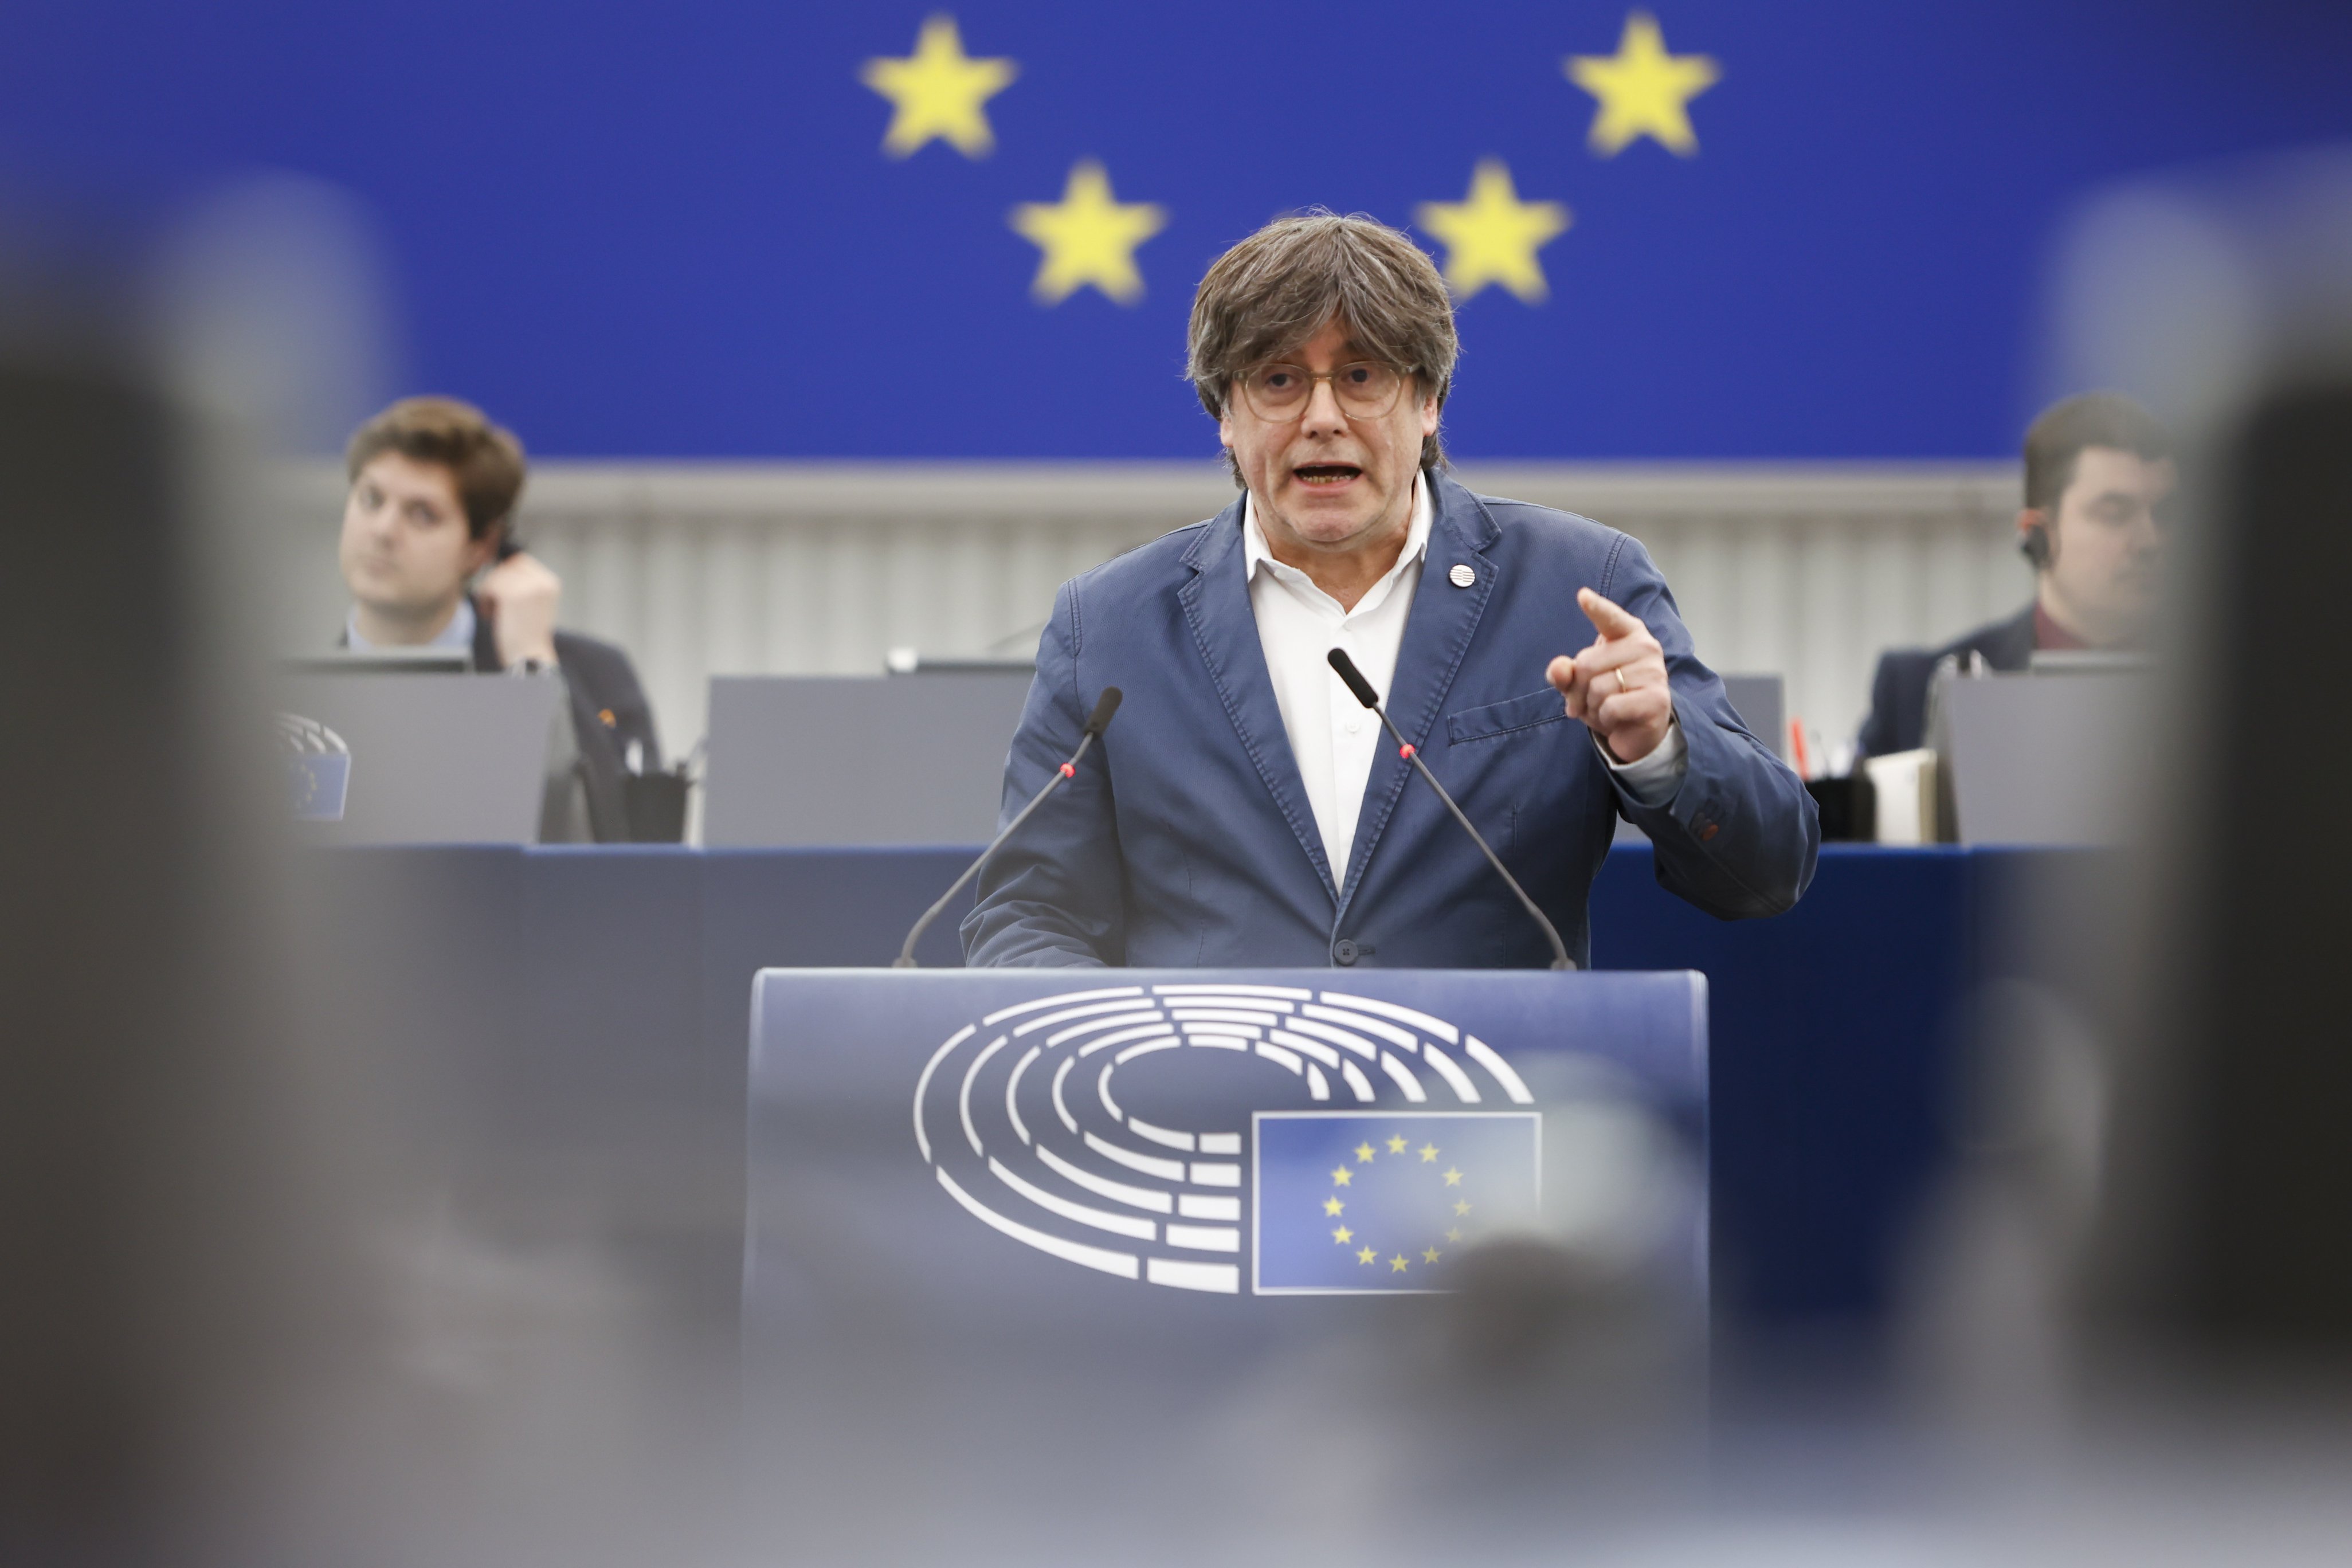 European General Court to release decision on Puigdemont's immunity on July 5th